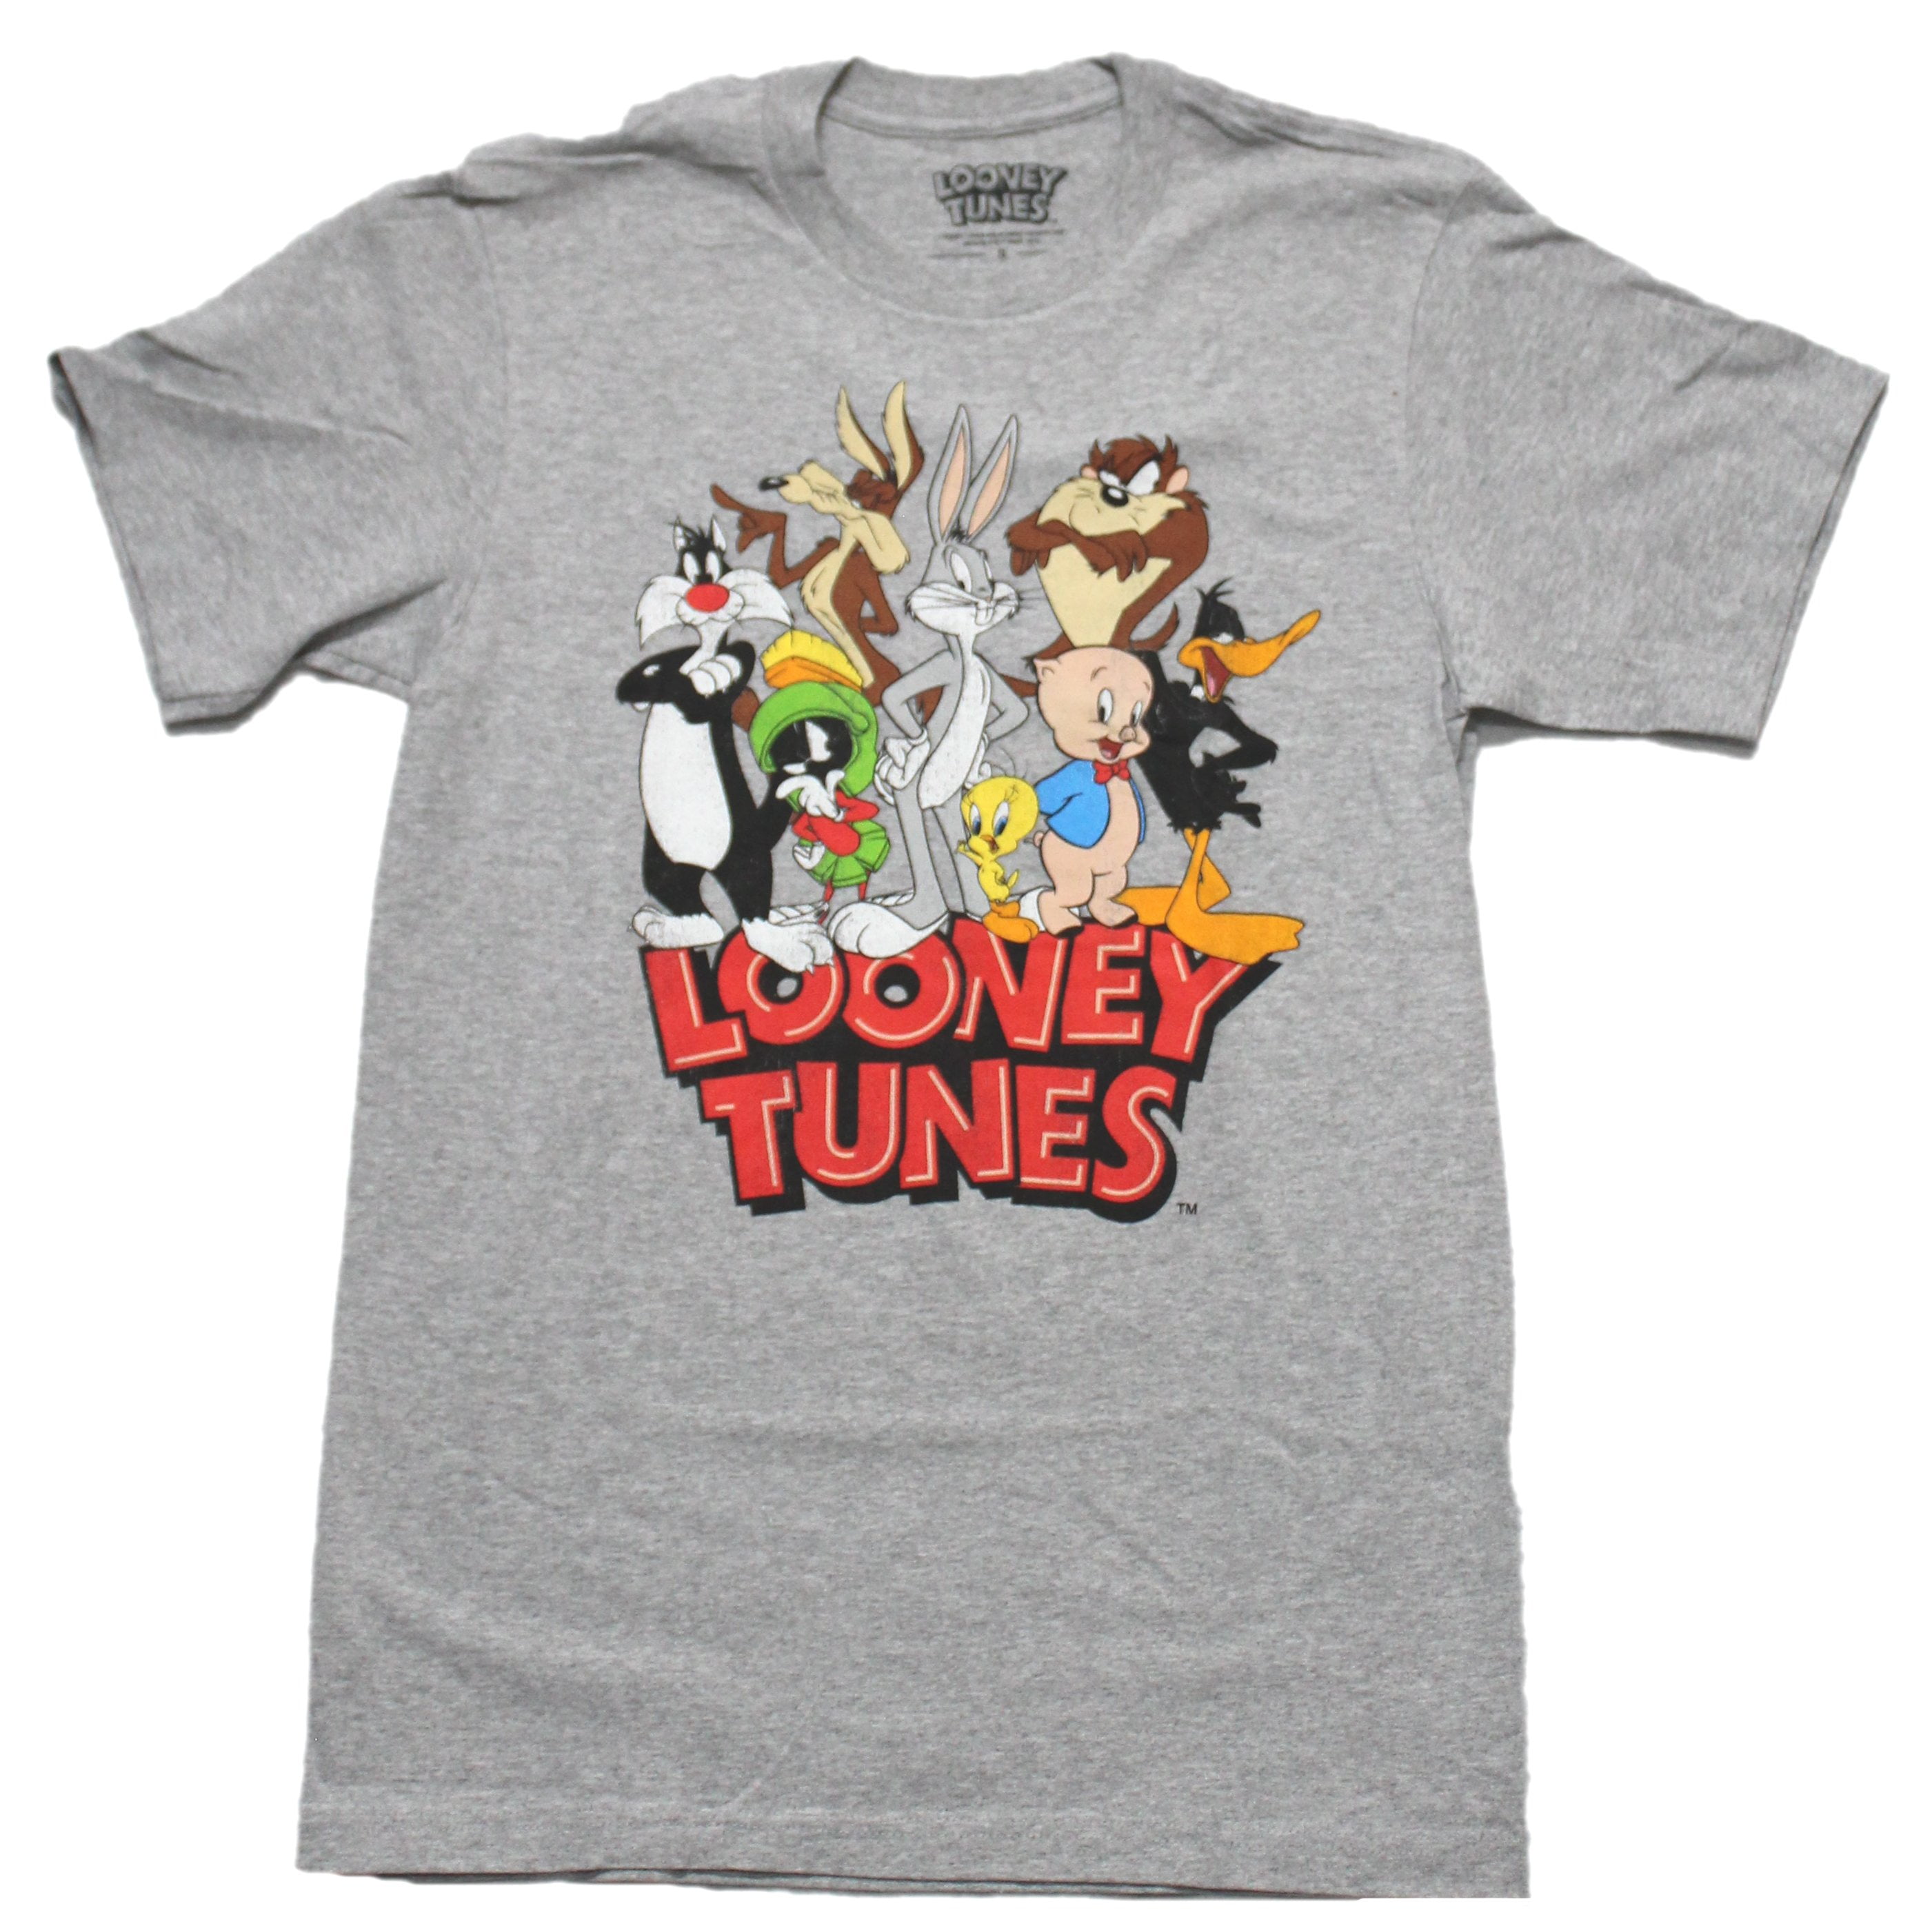 Looney Tunes Mens T-Shirt and (Medium) Bugs Taz More - Logo Over Image